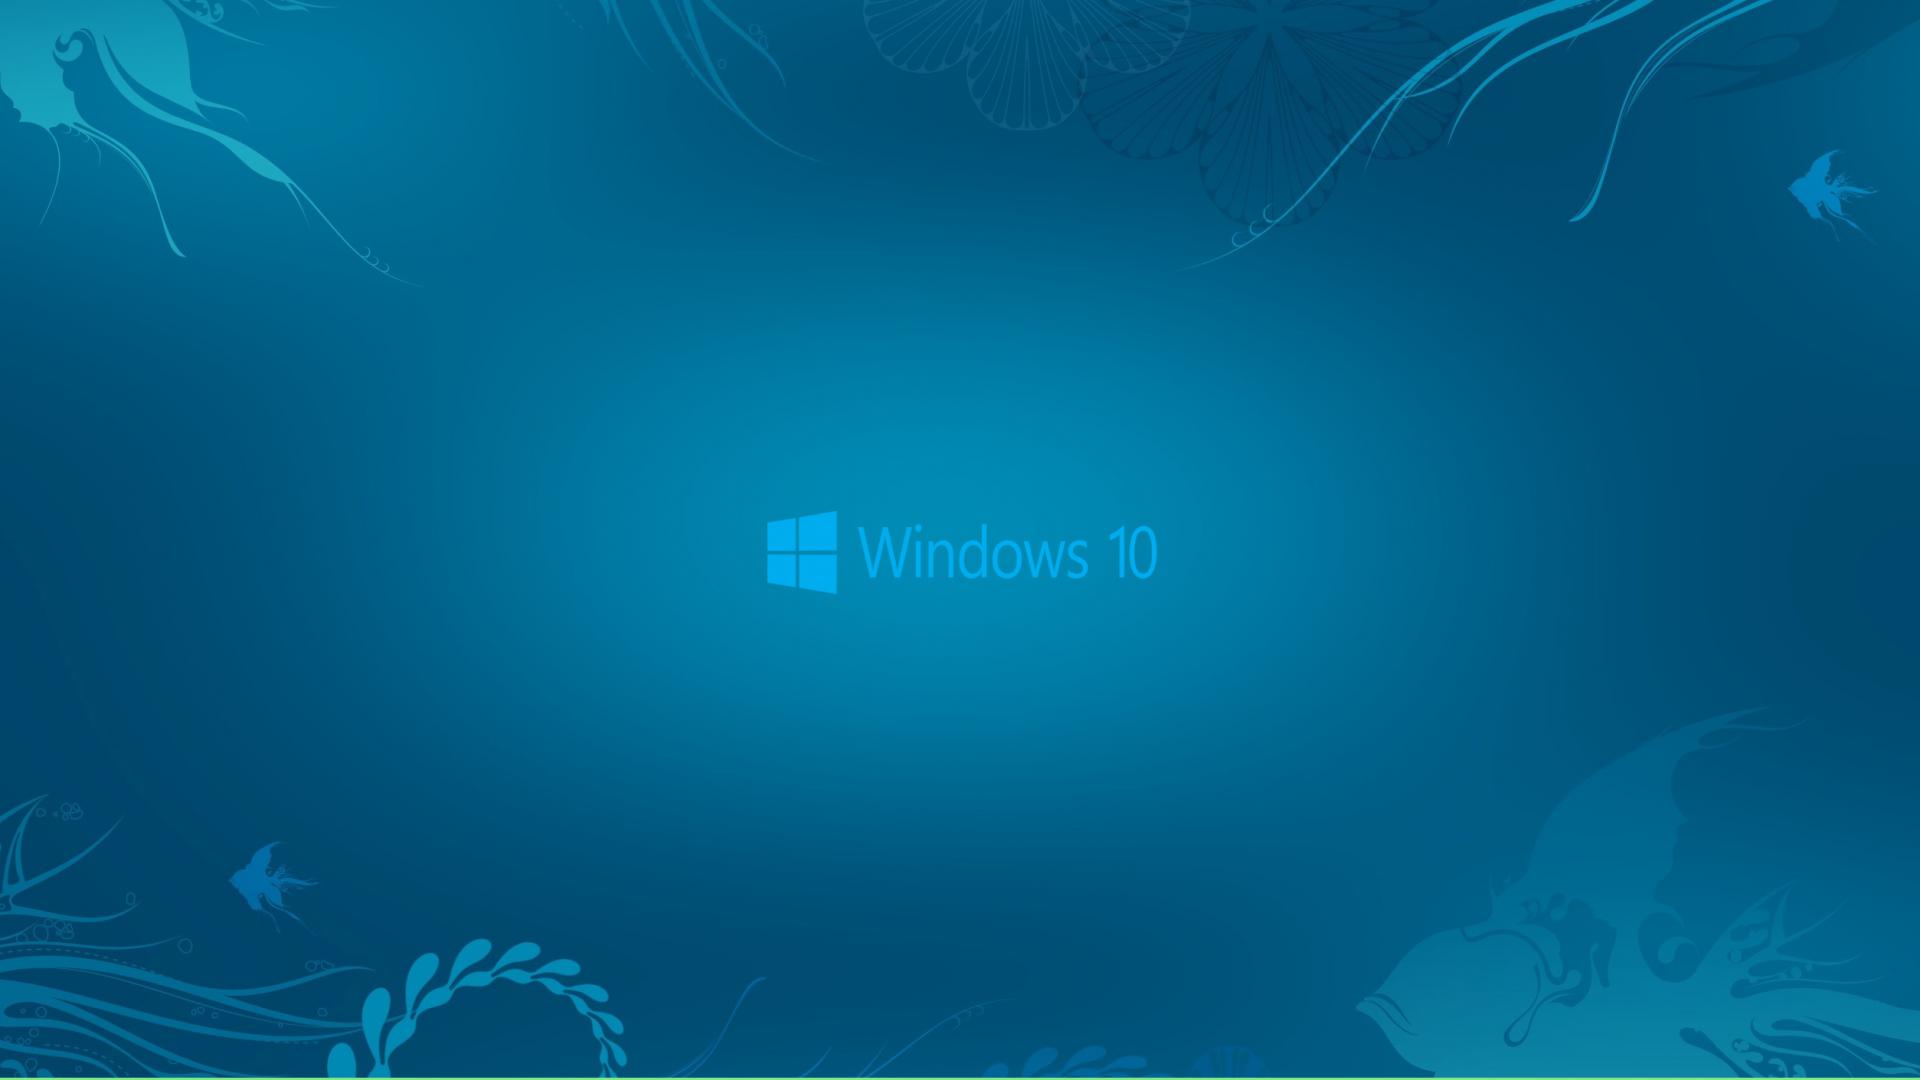 Windows 10 Wallpaper in Abstract Deep Blue See and New Logo HD